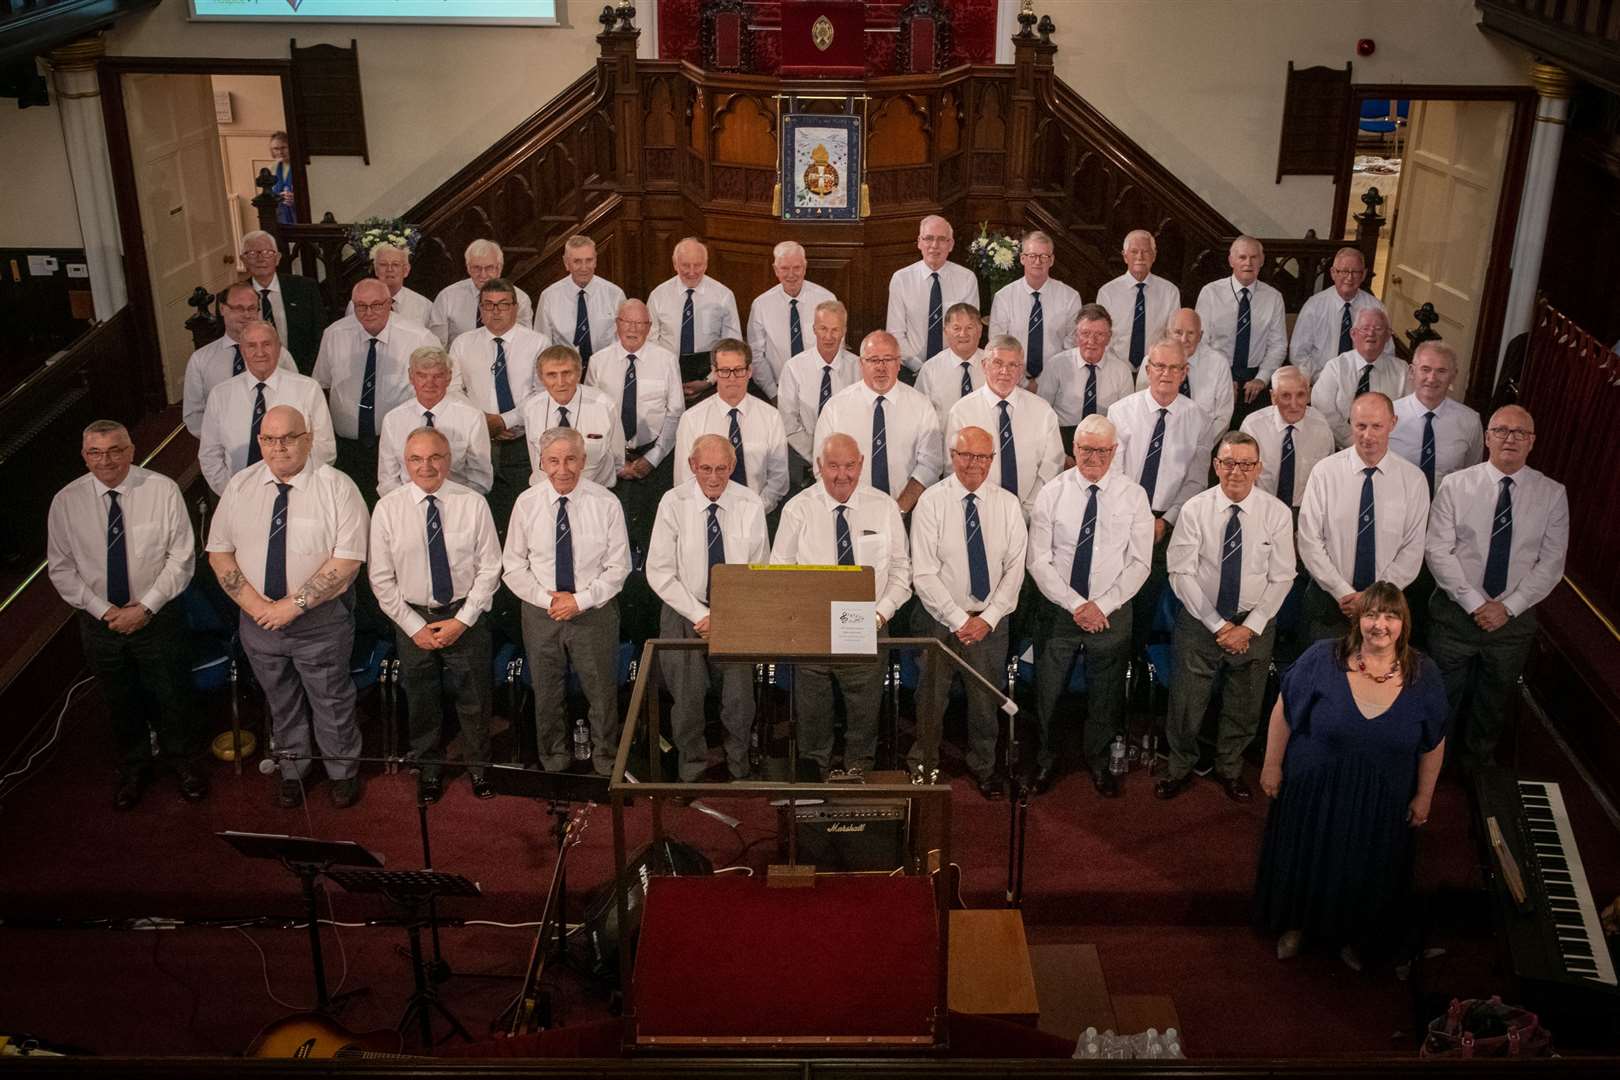 Conductor Eileen Mackintosh (bottom right) and The Choir.